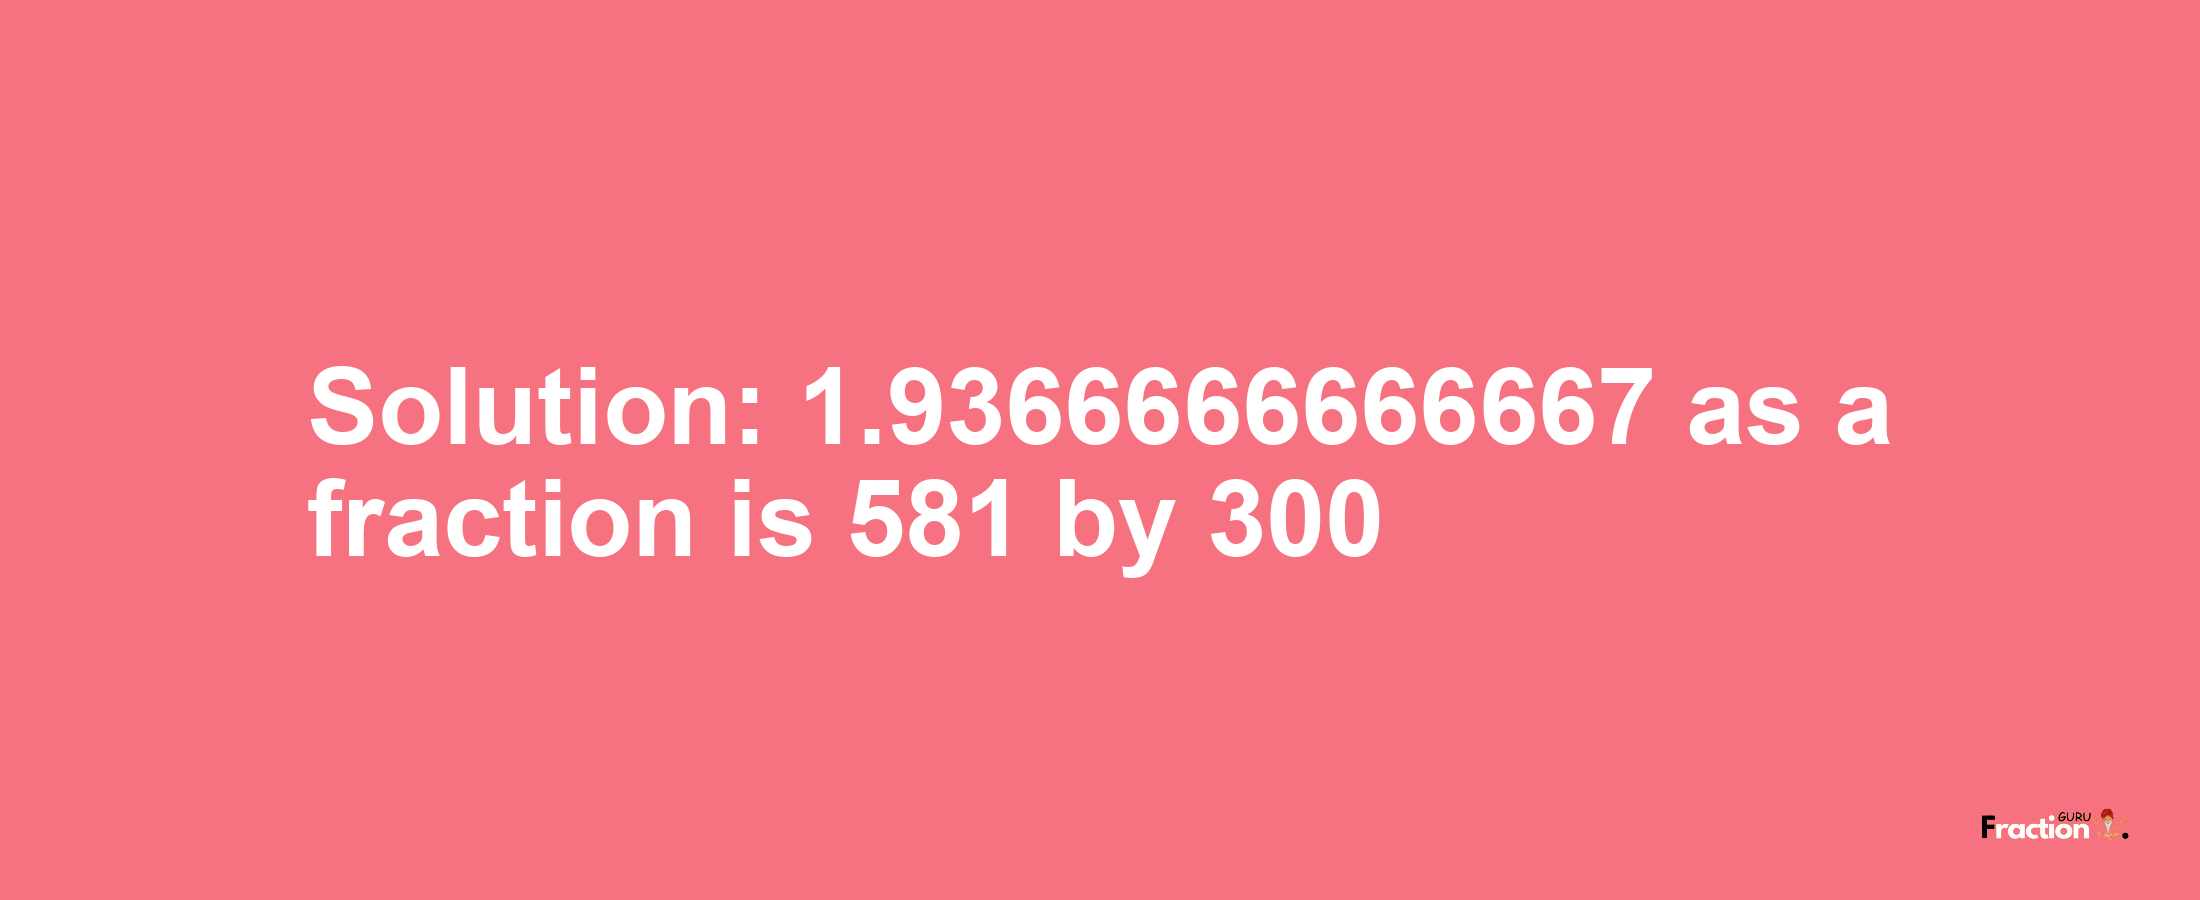 Solution:1.9366666666667 as a fraction is 581/300